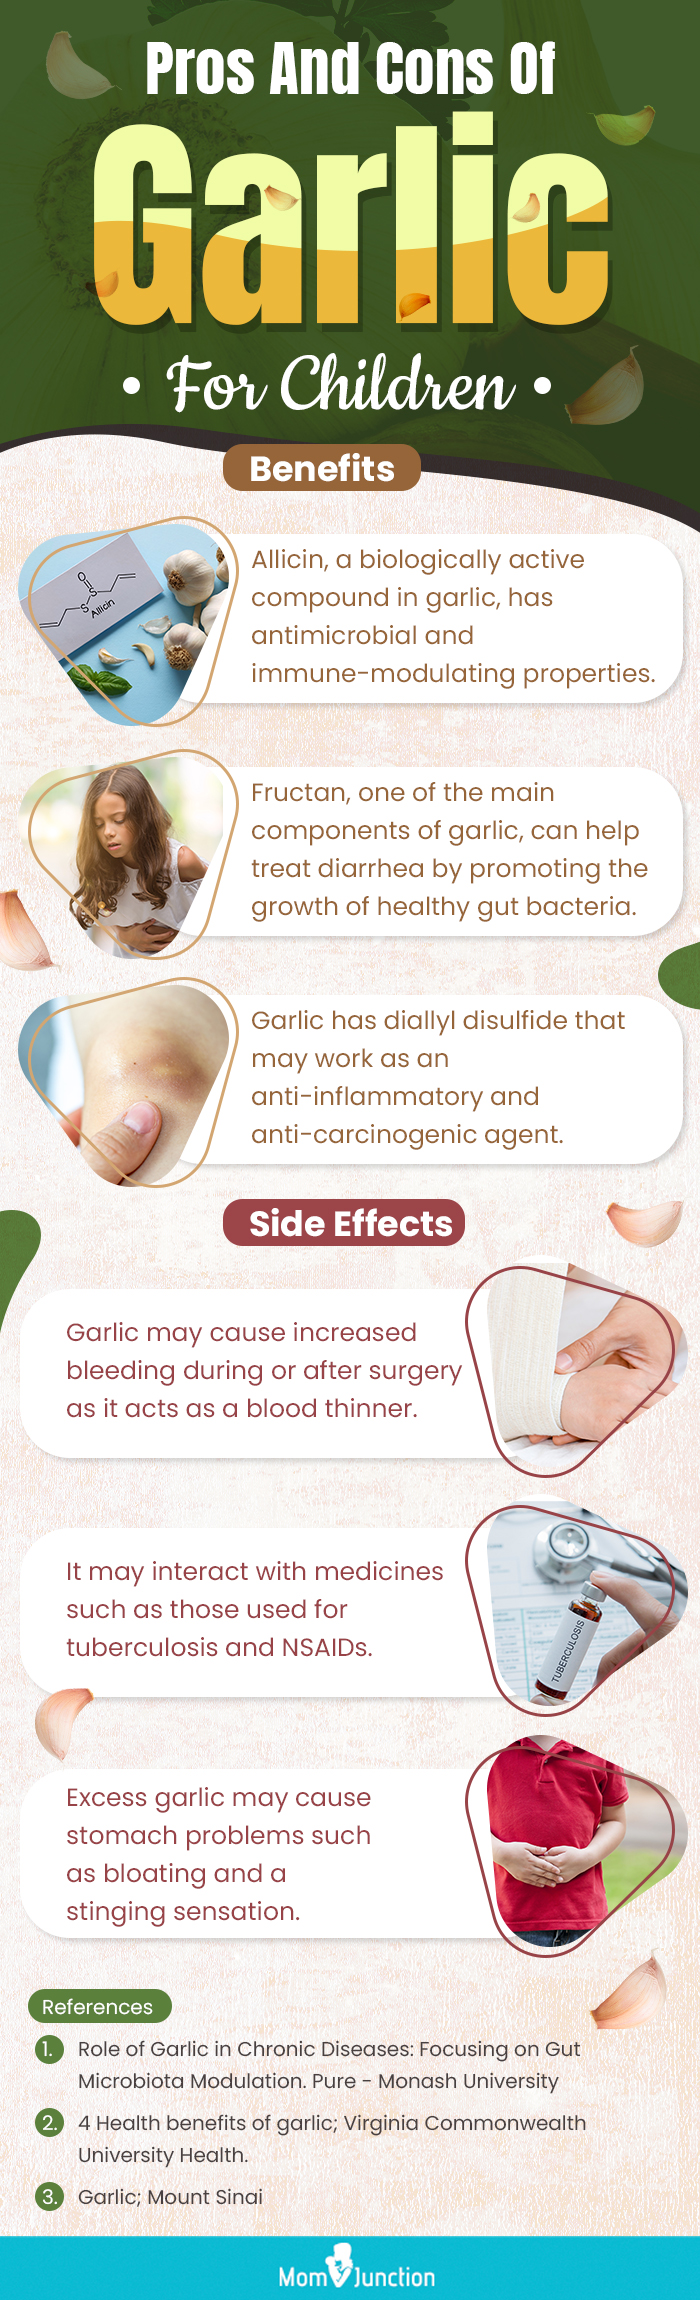 pros and cons of garlic for children (infographic)